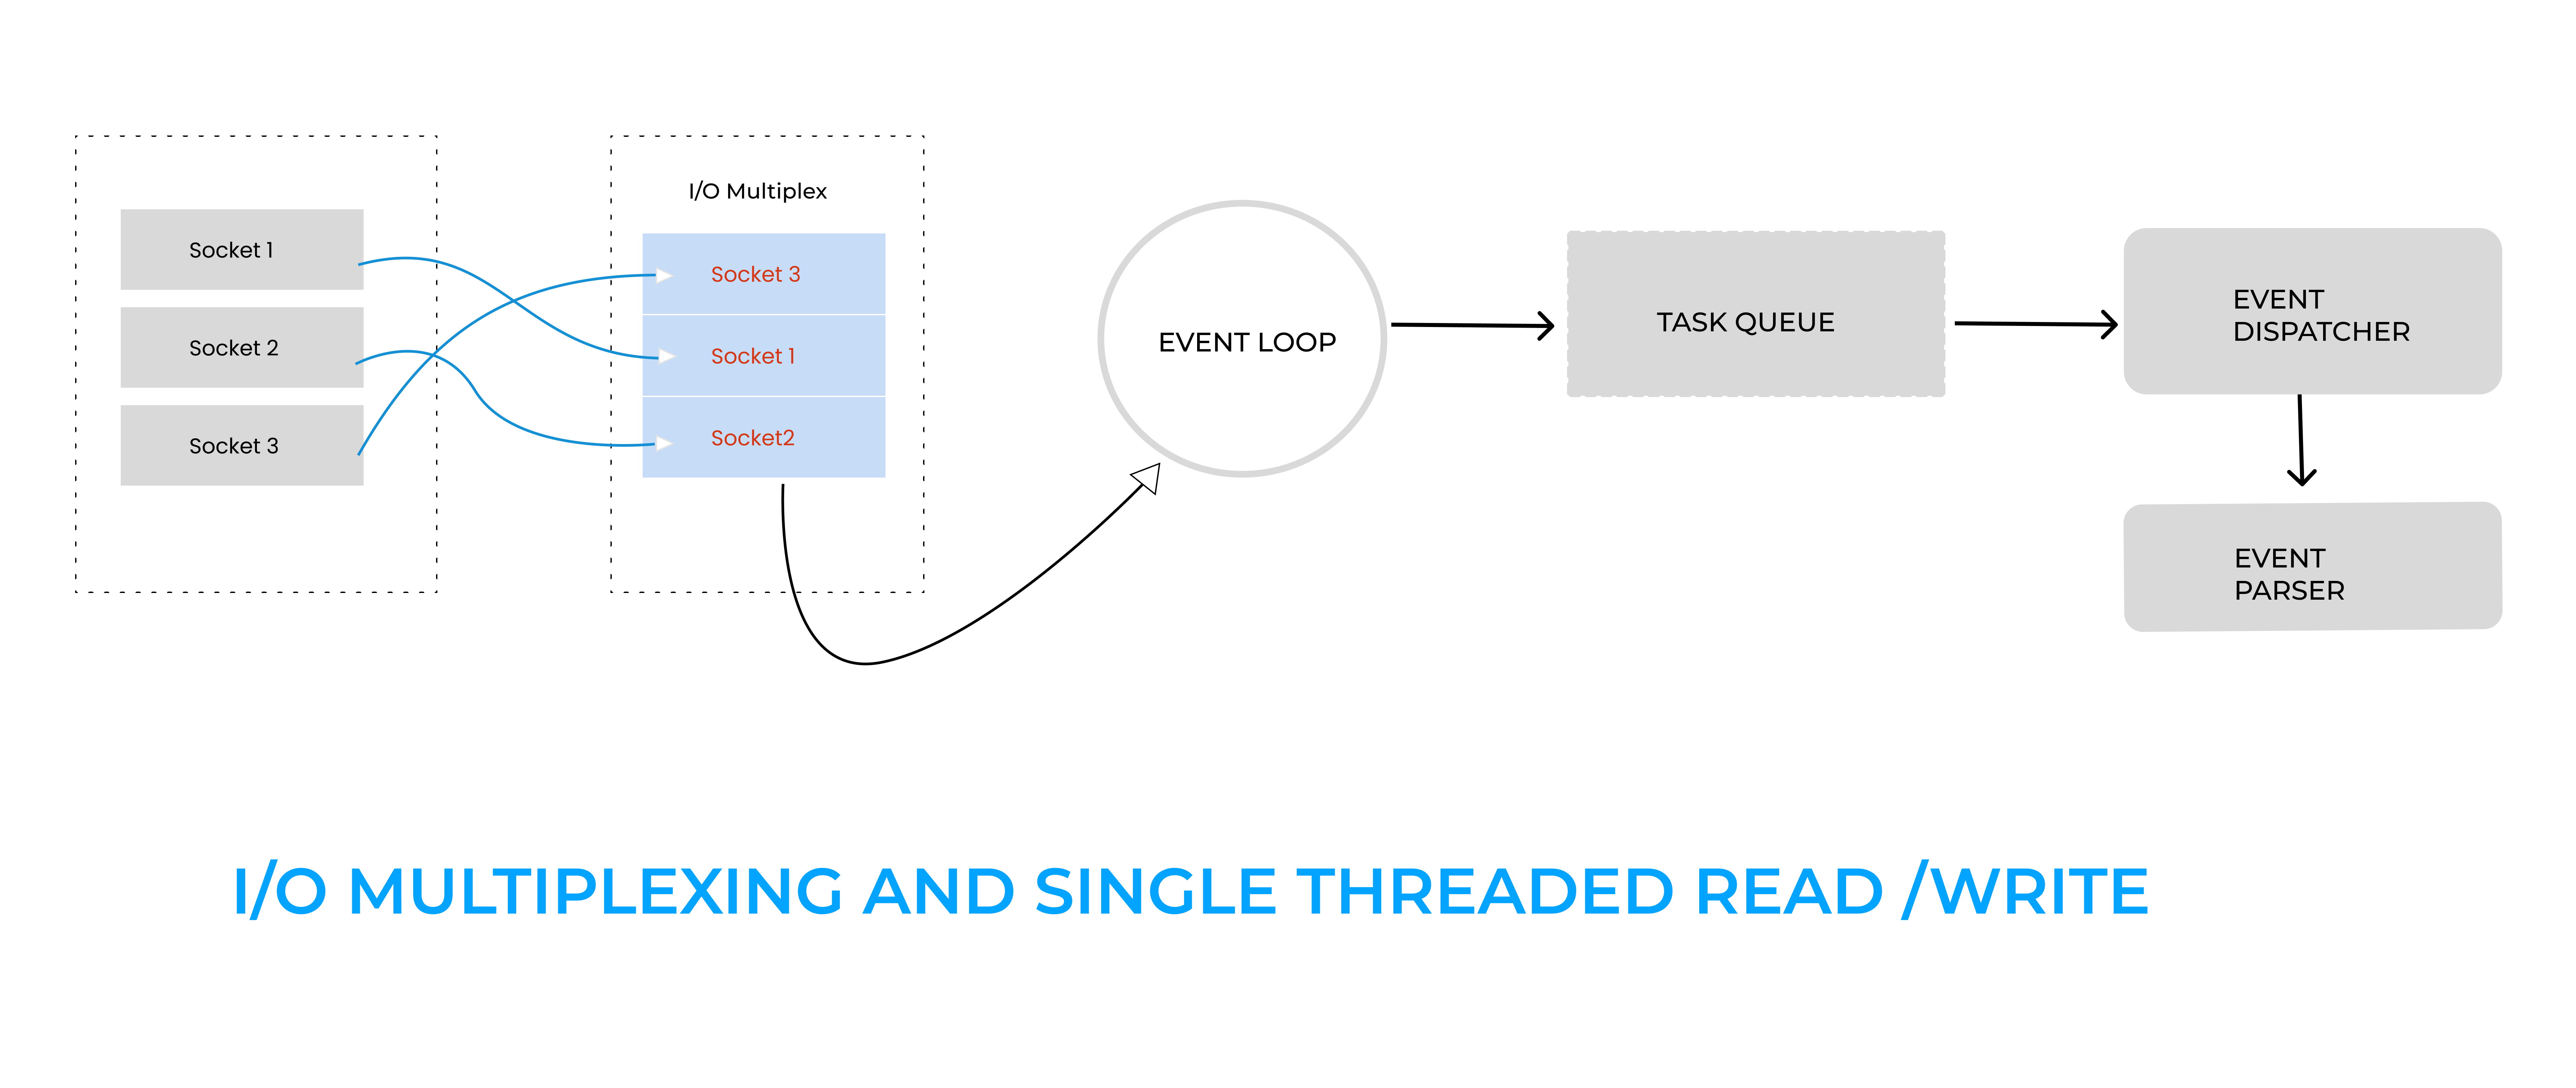 I/0 multiplexing and single threaded read/write